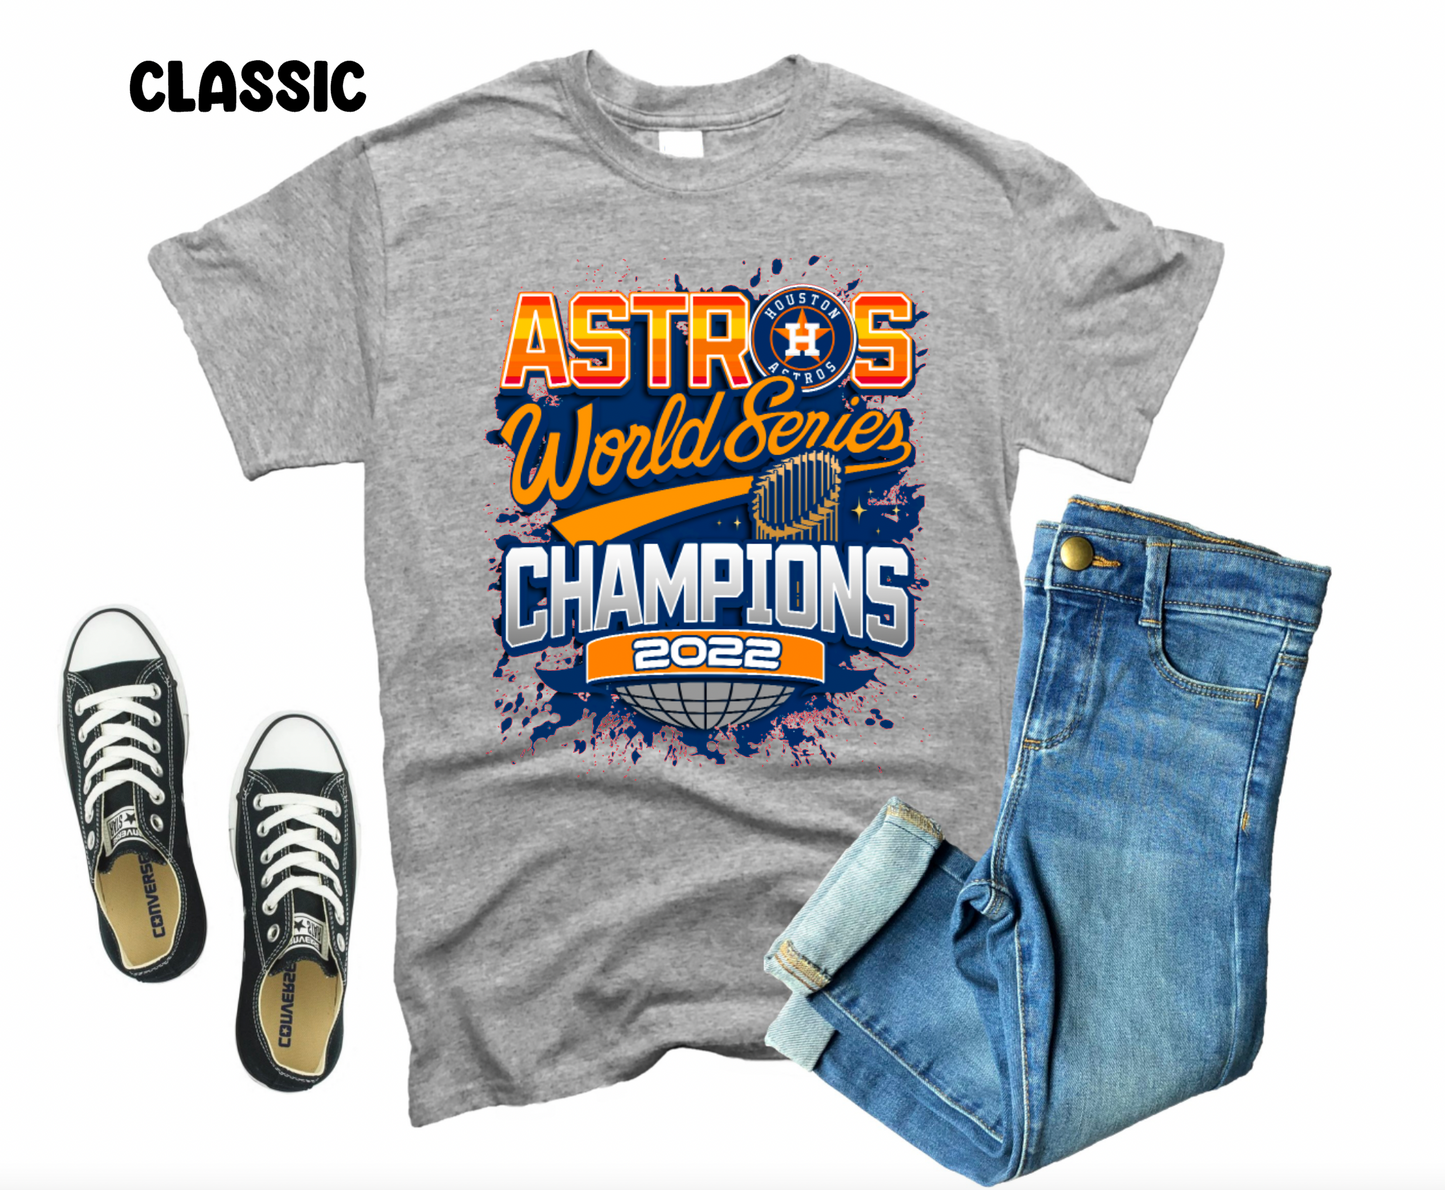 Astros 2022 World Series Champions || Classic or Throwback T-Shirt